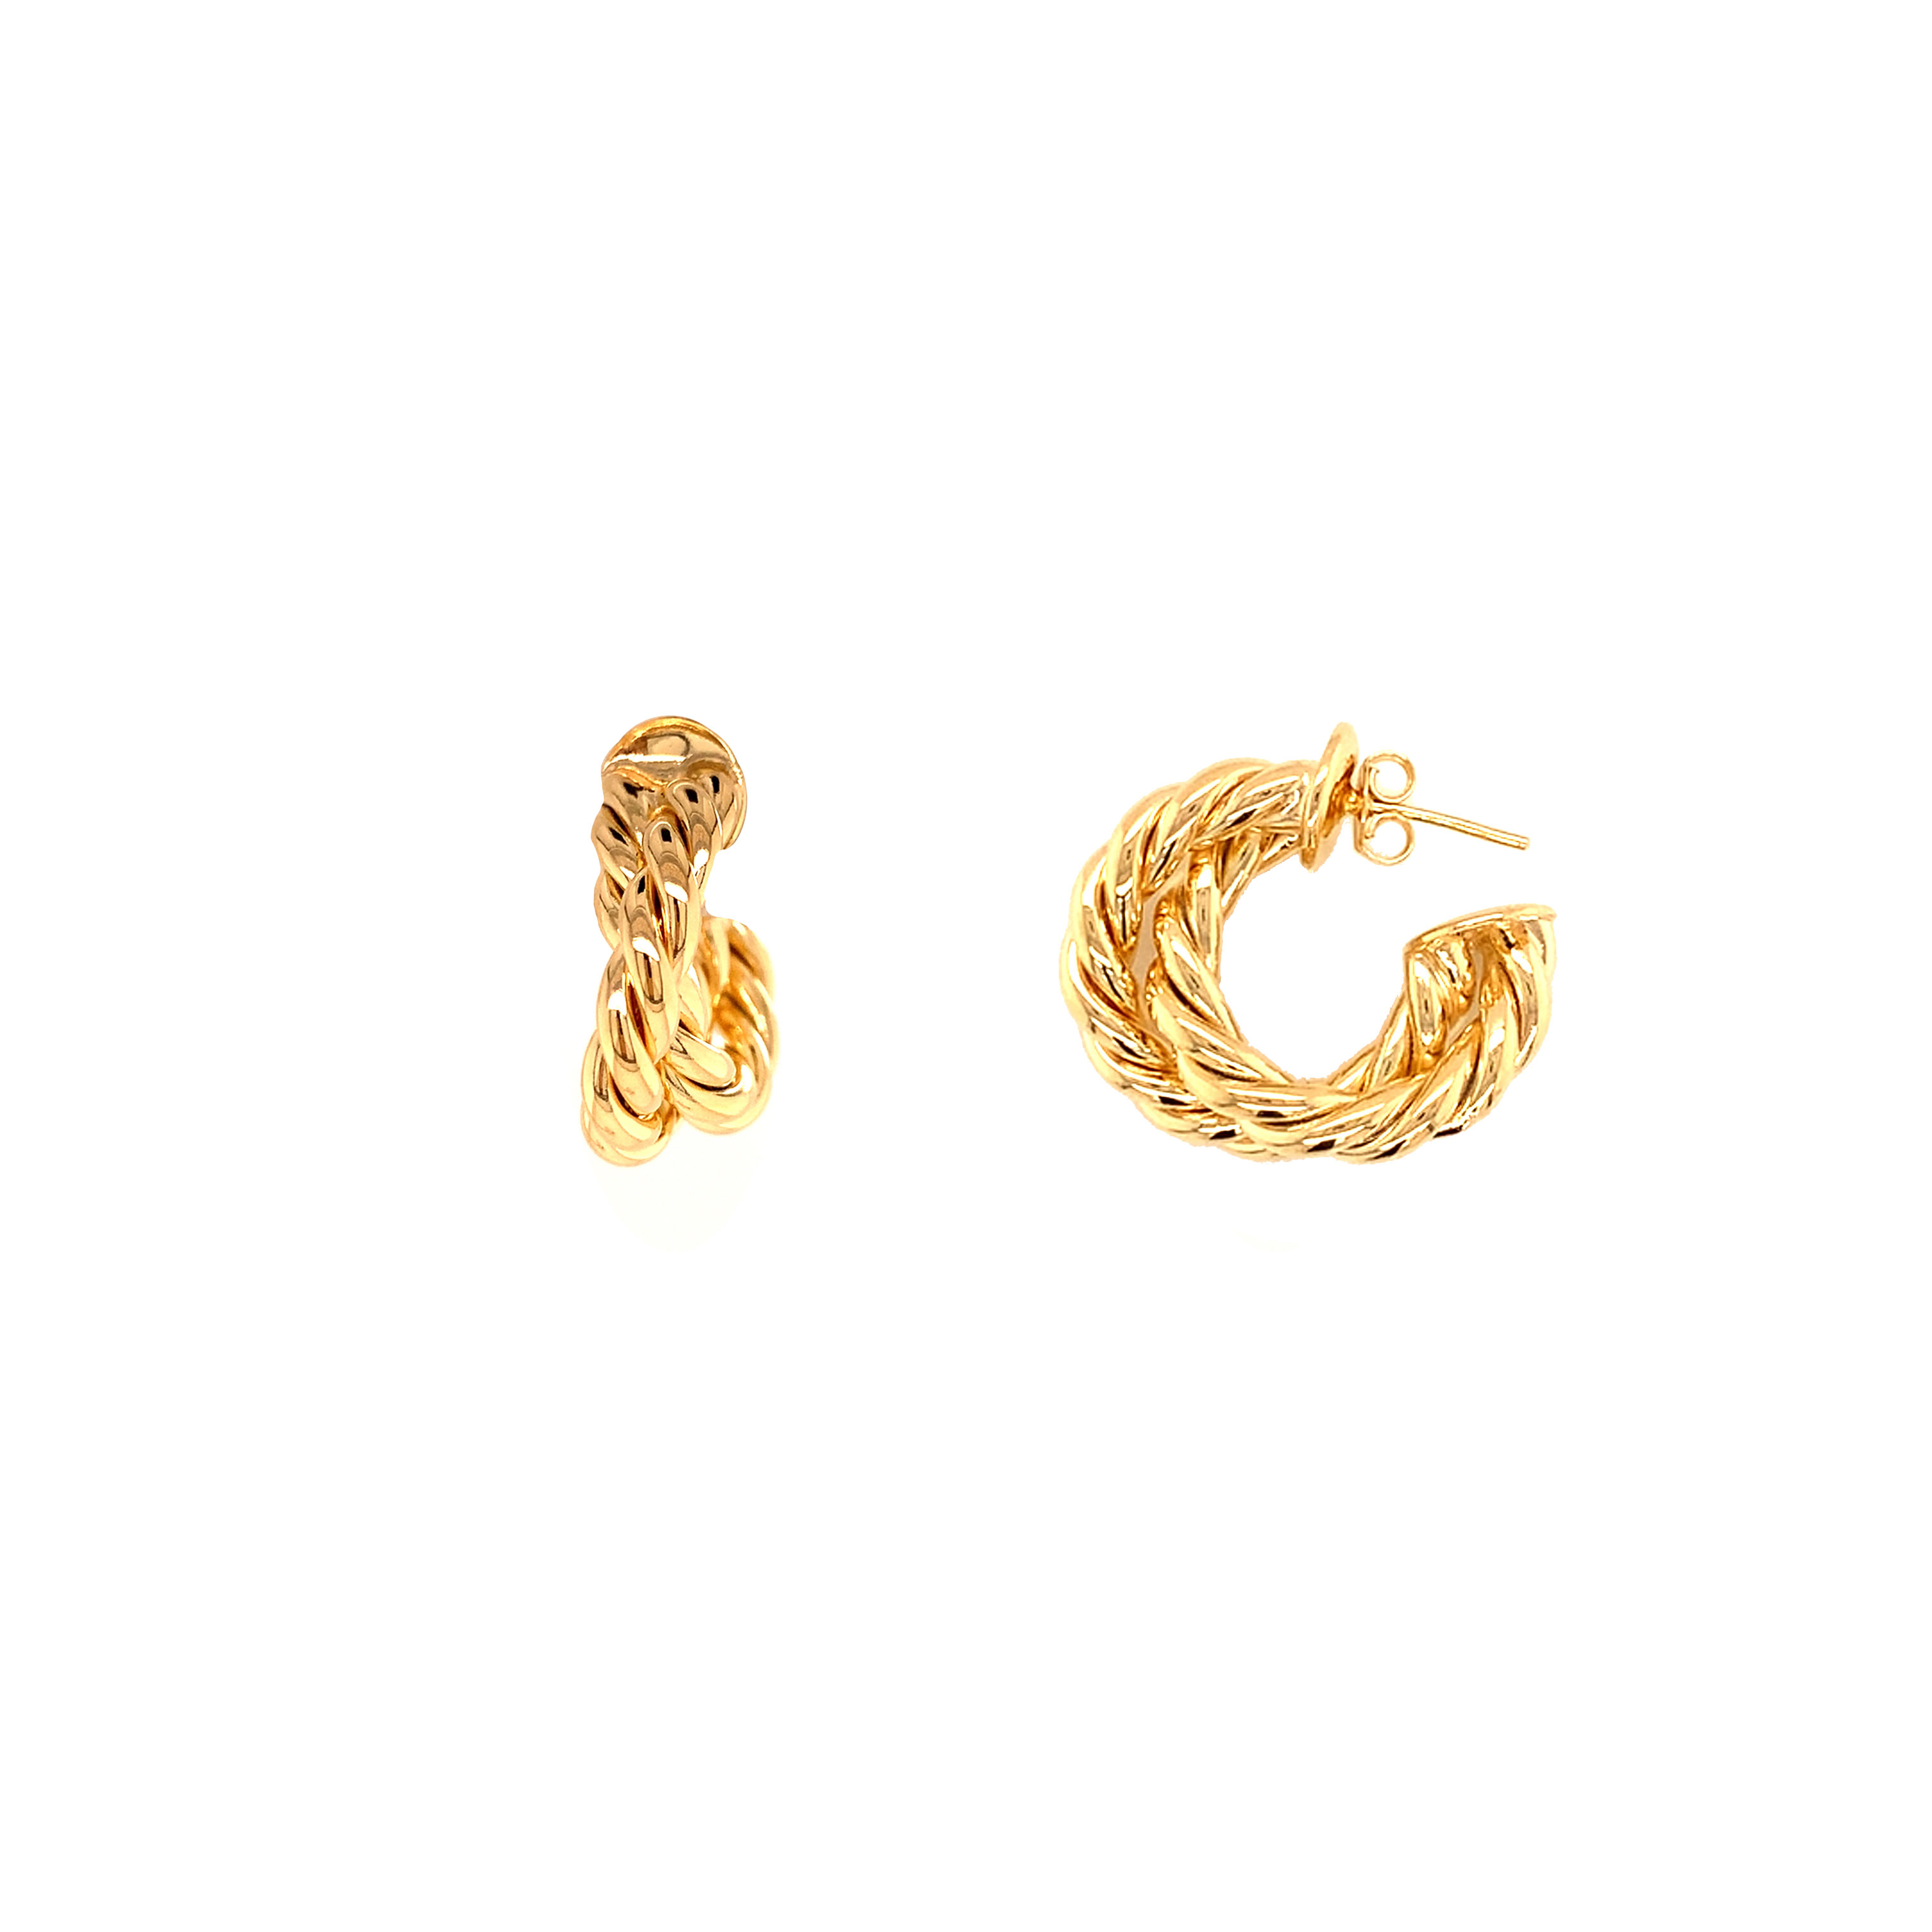 8mm x 23mm Looped Twisted Hoop - Gold Filled